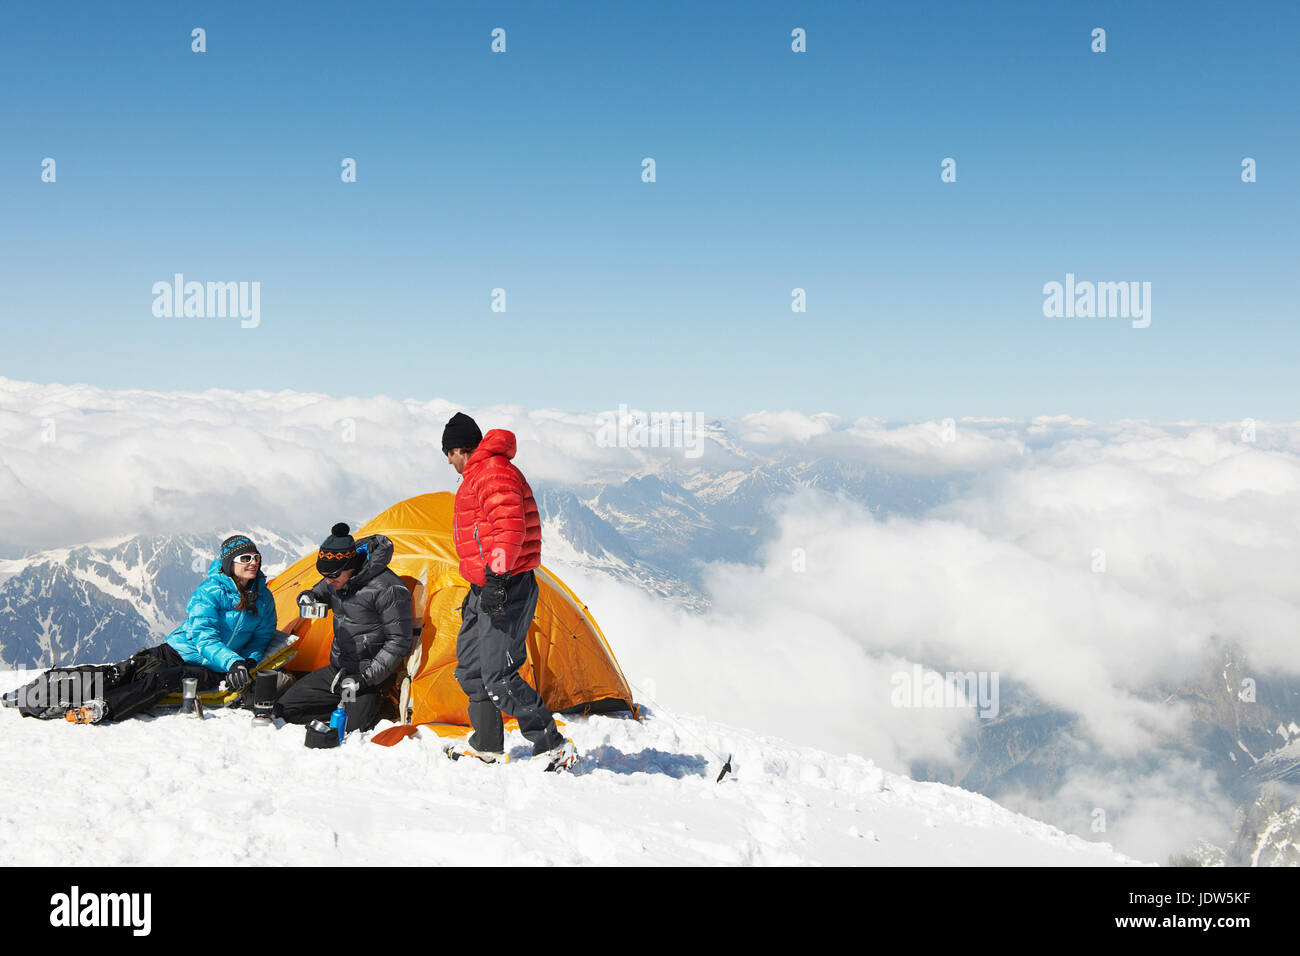 People camping in mountains, Chamonix, France Stock Photo